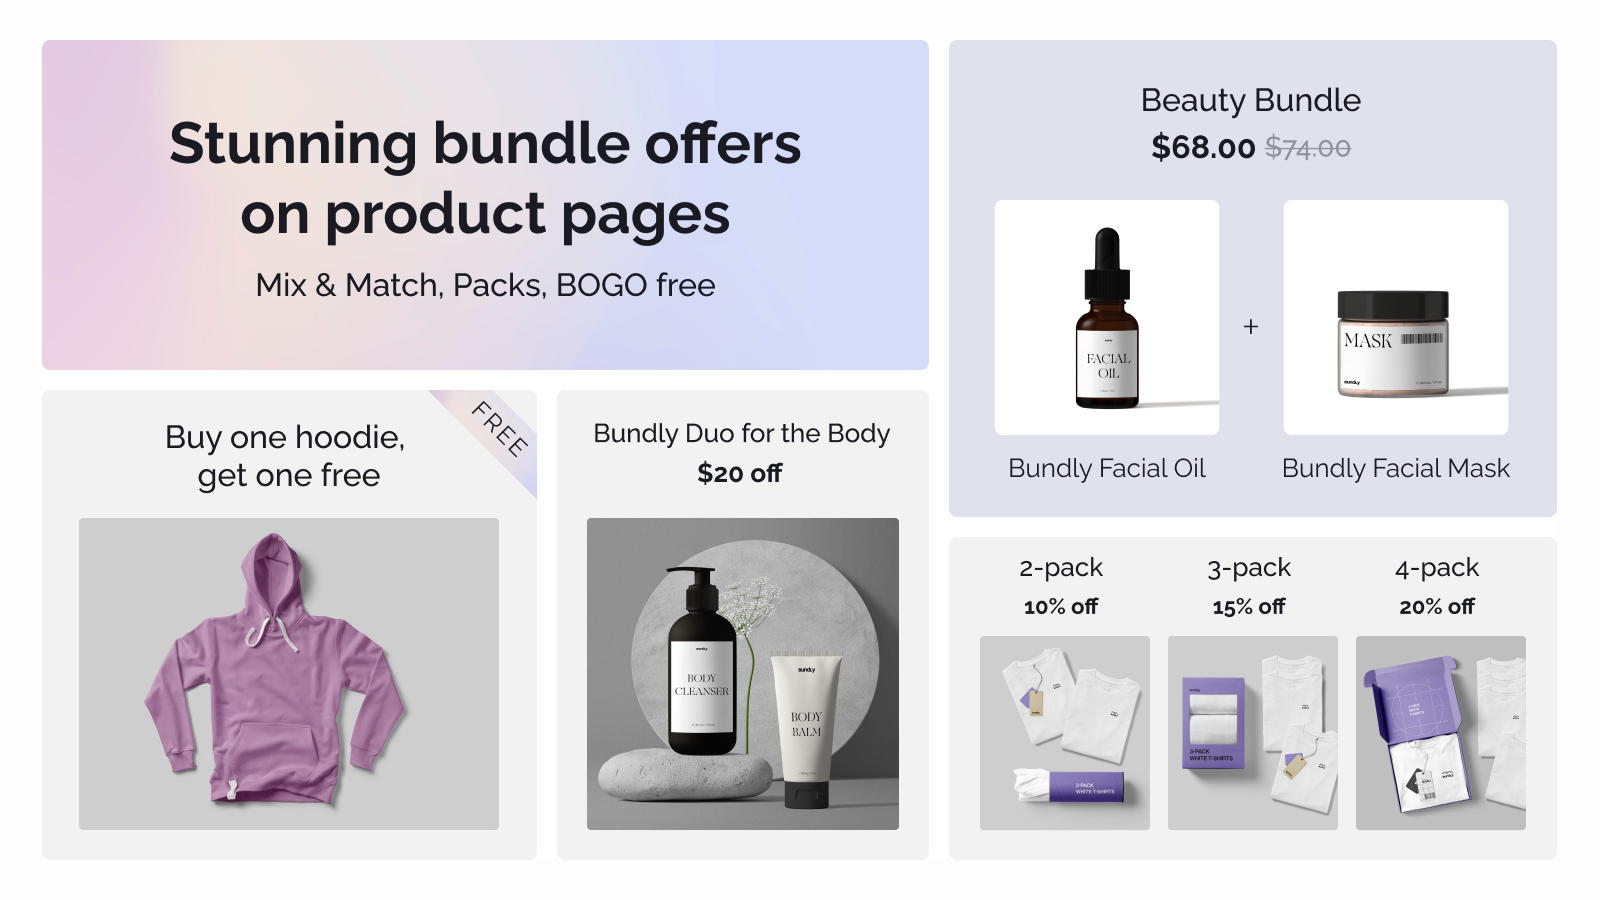 Stunning bundle offers on product pages